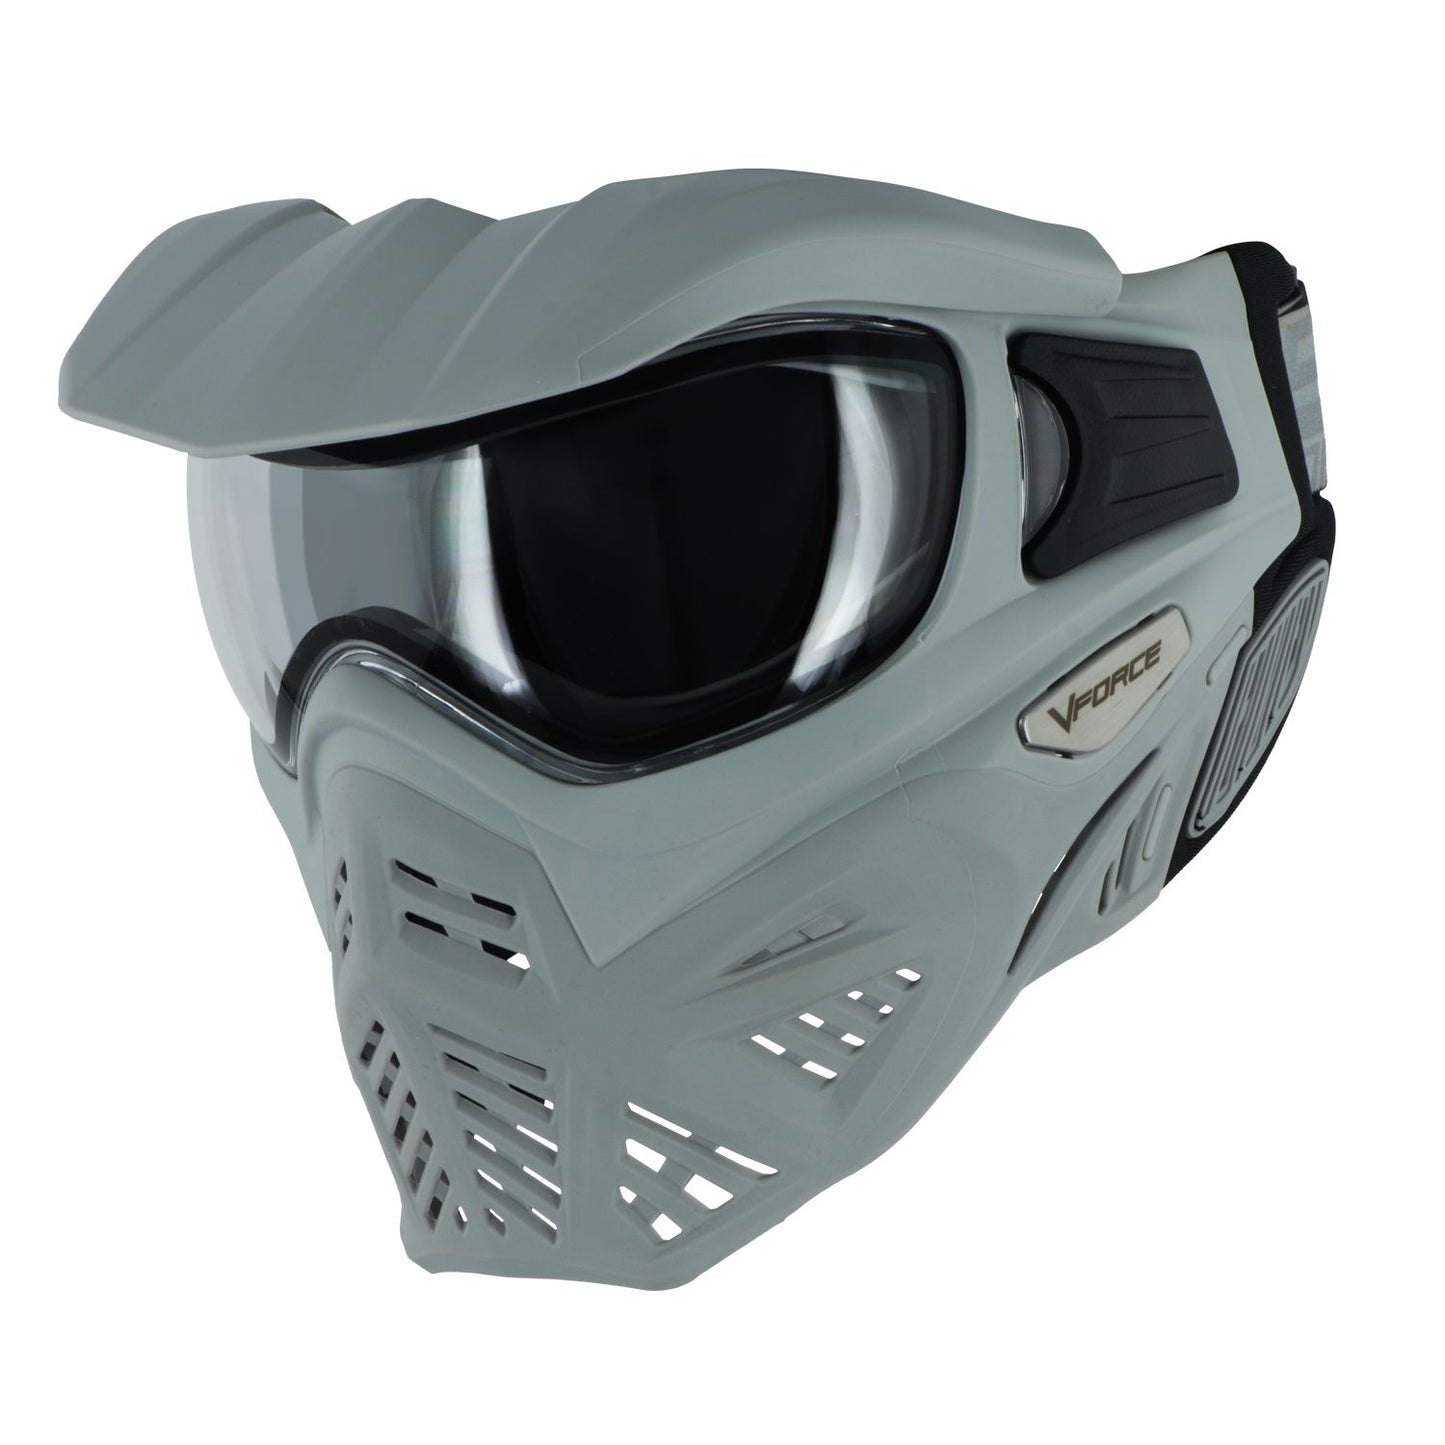 V-Force Grill 2.0 Paintball Goggle - Thermal Clear Lens - Shark (Grey/Grey)